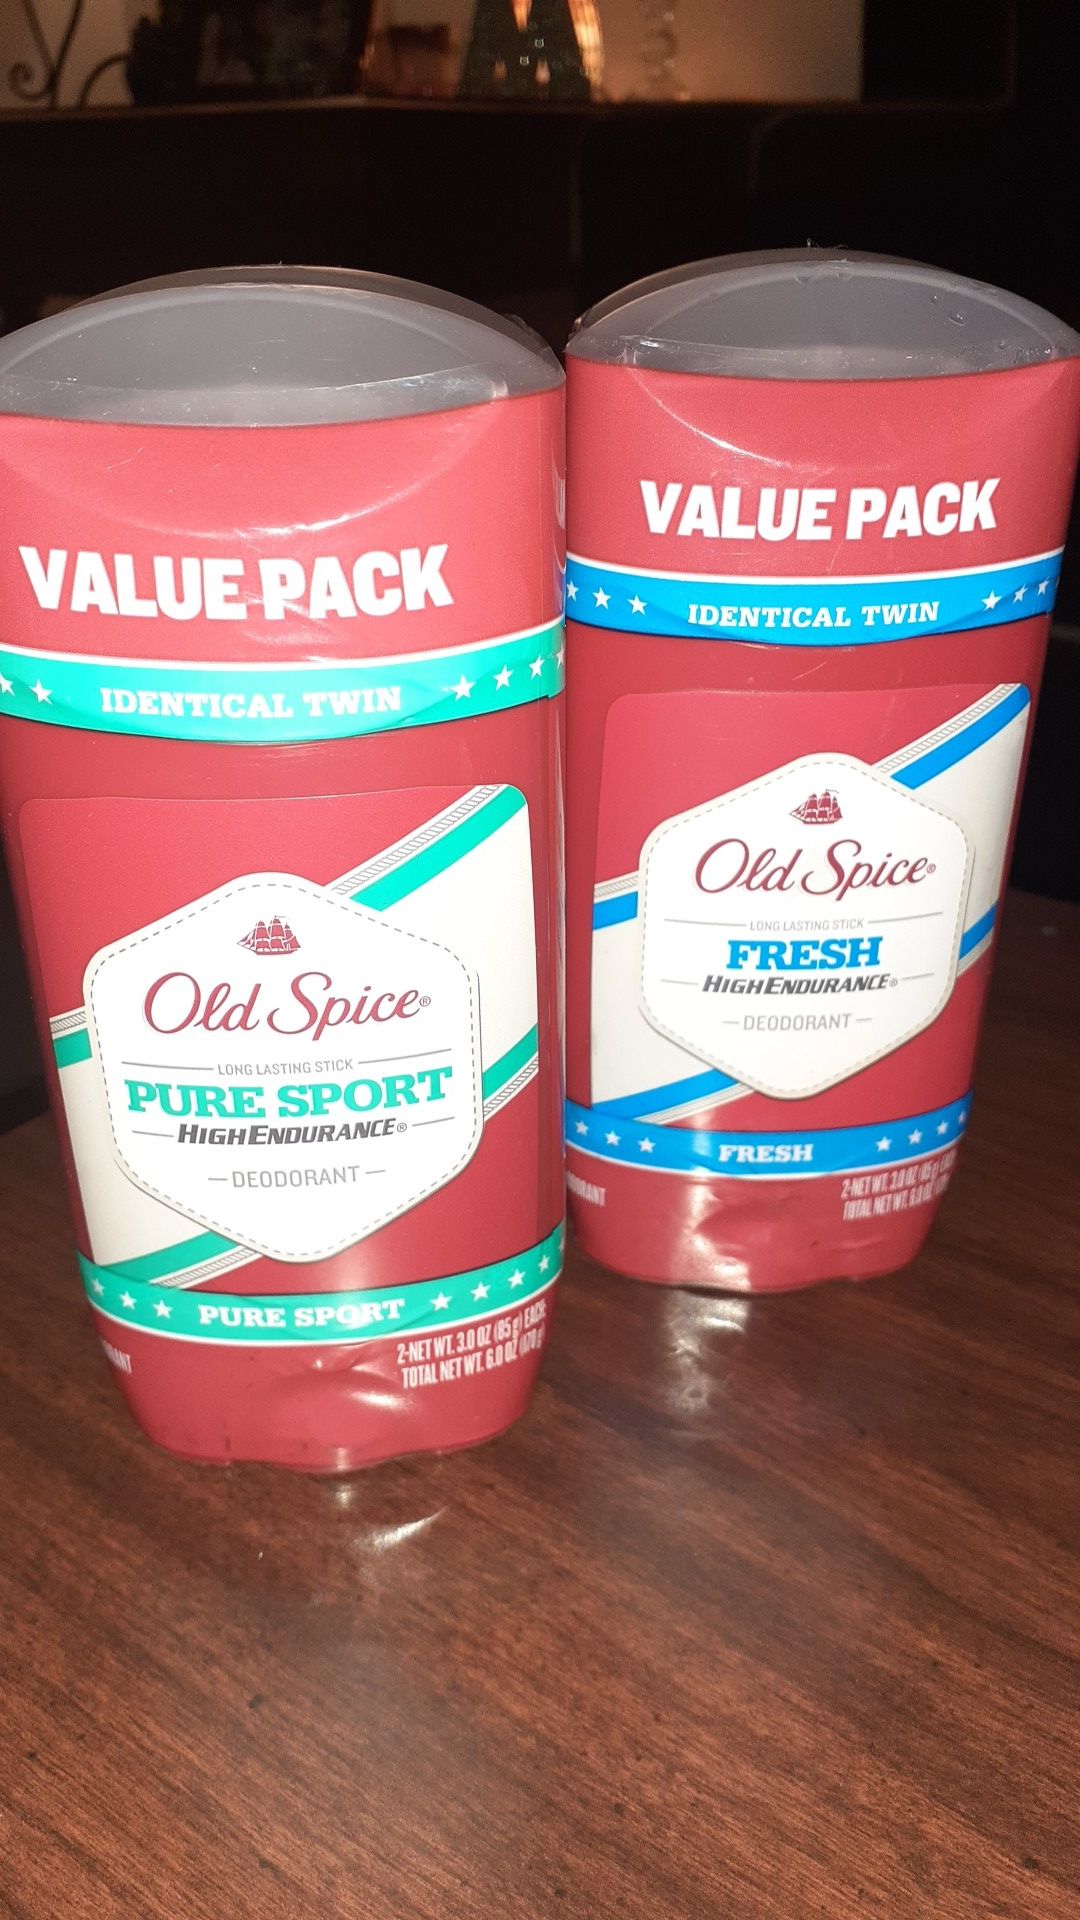 Old spice value pay